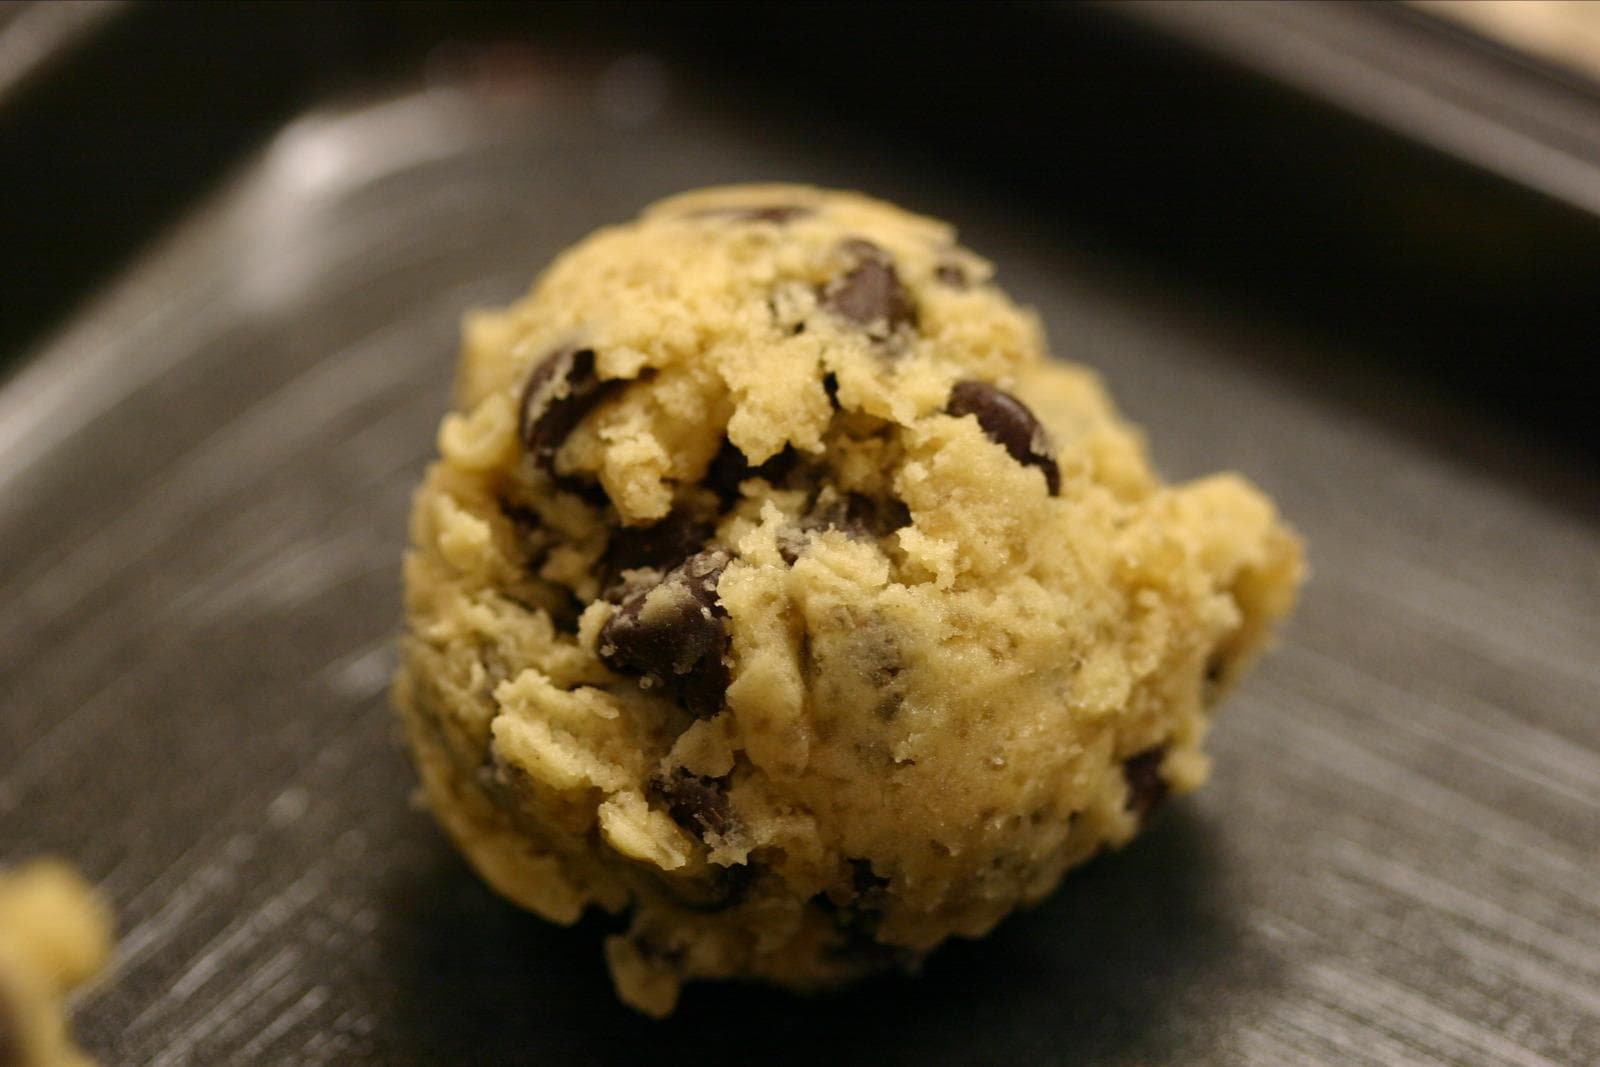 You got: Cookie Dough! The Chocolate Treats You Like Will Determine What Dessert Flavor You Are Deep Down Inside